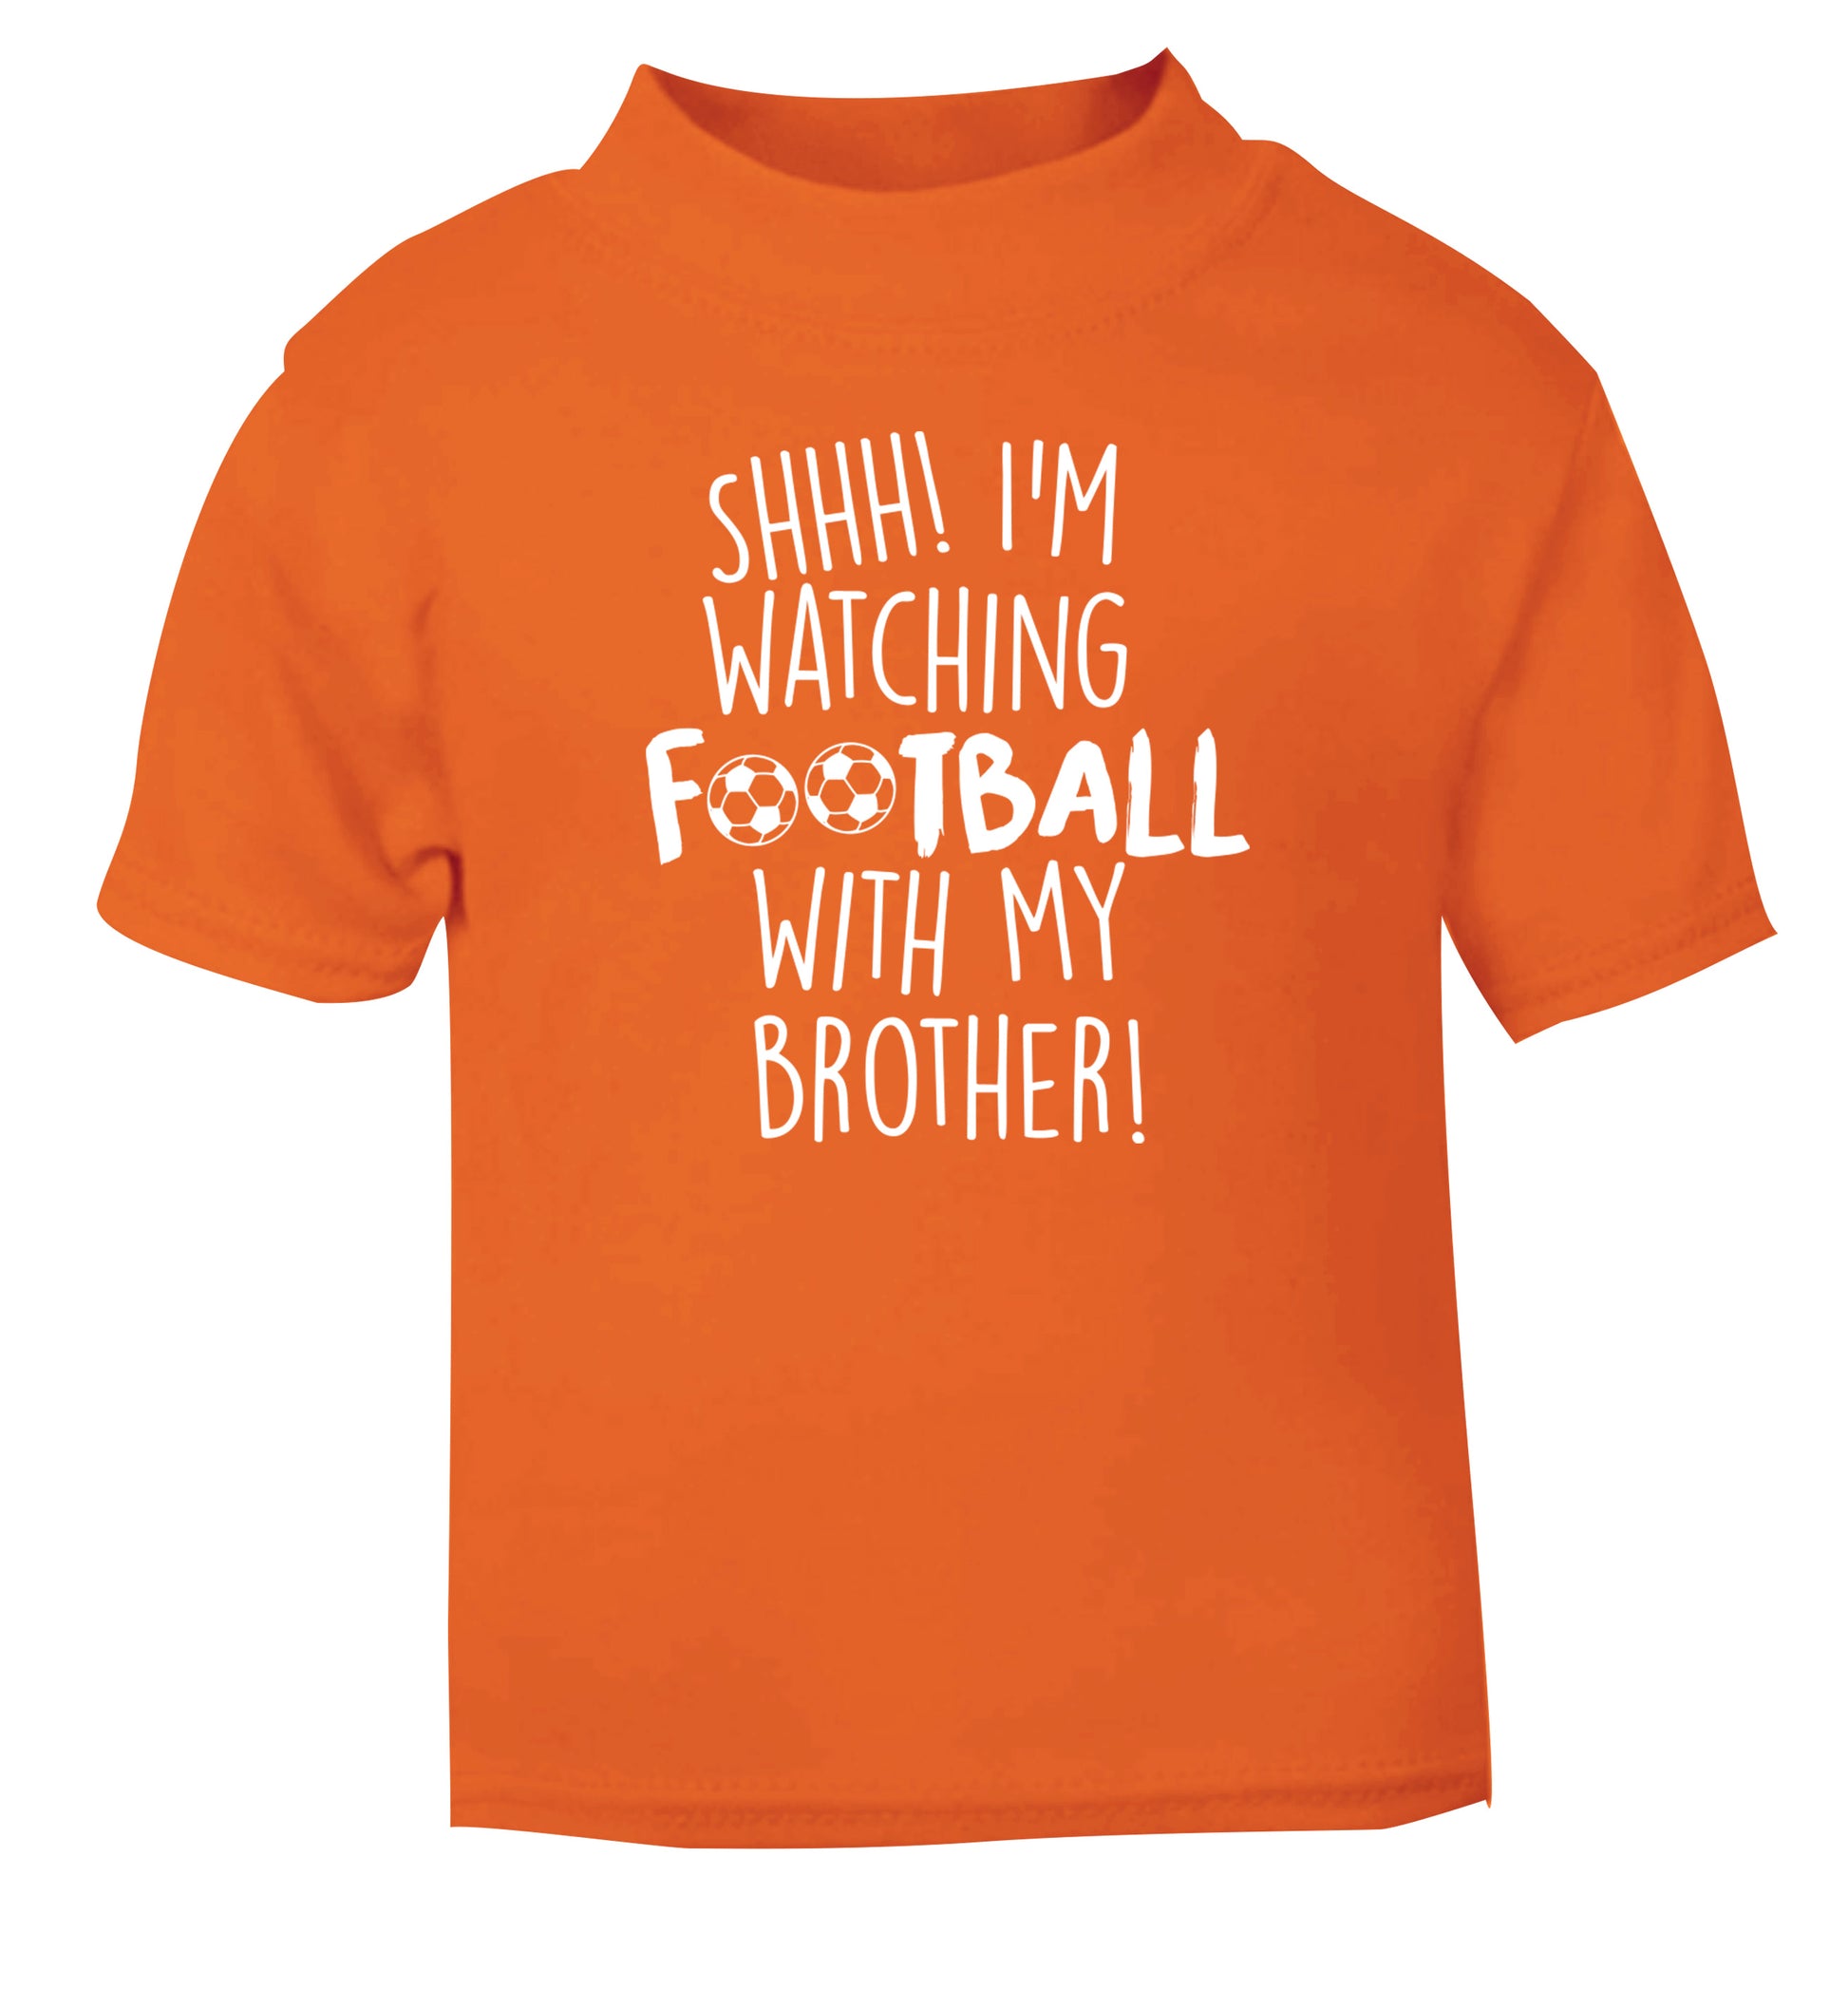 Shhh I'm watching football with my brother orange Baby Toddler Tshirt 2 Years